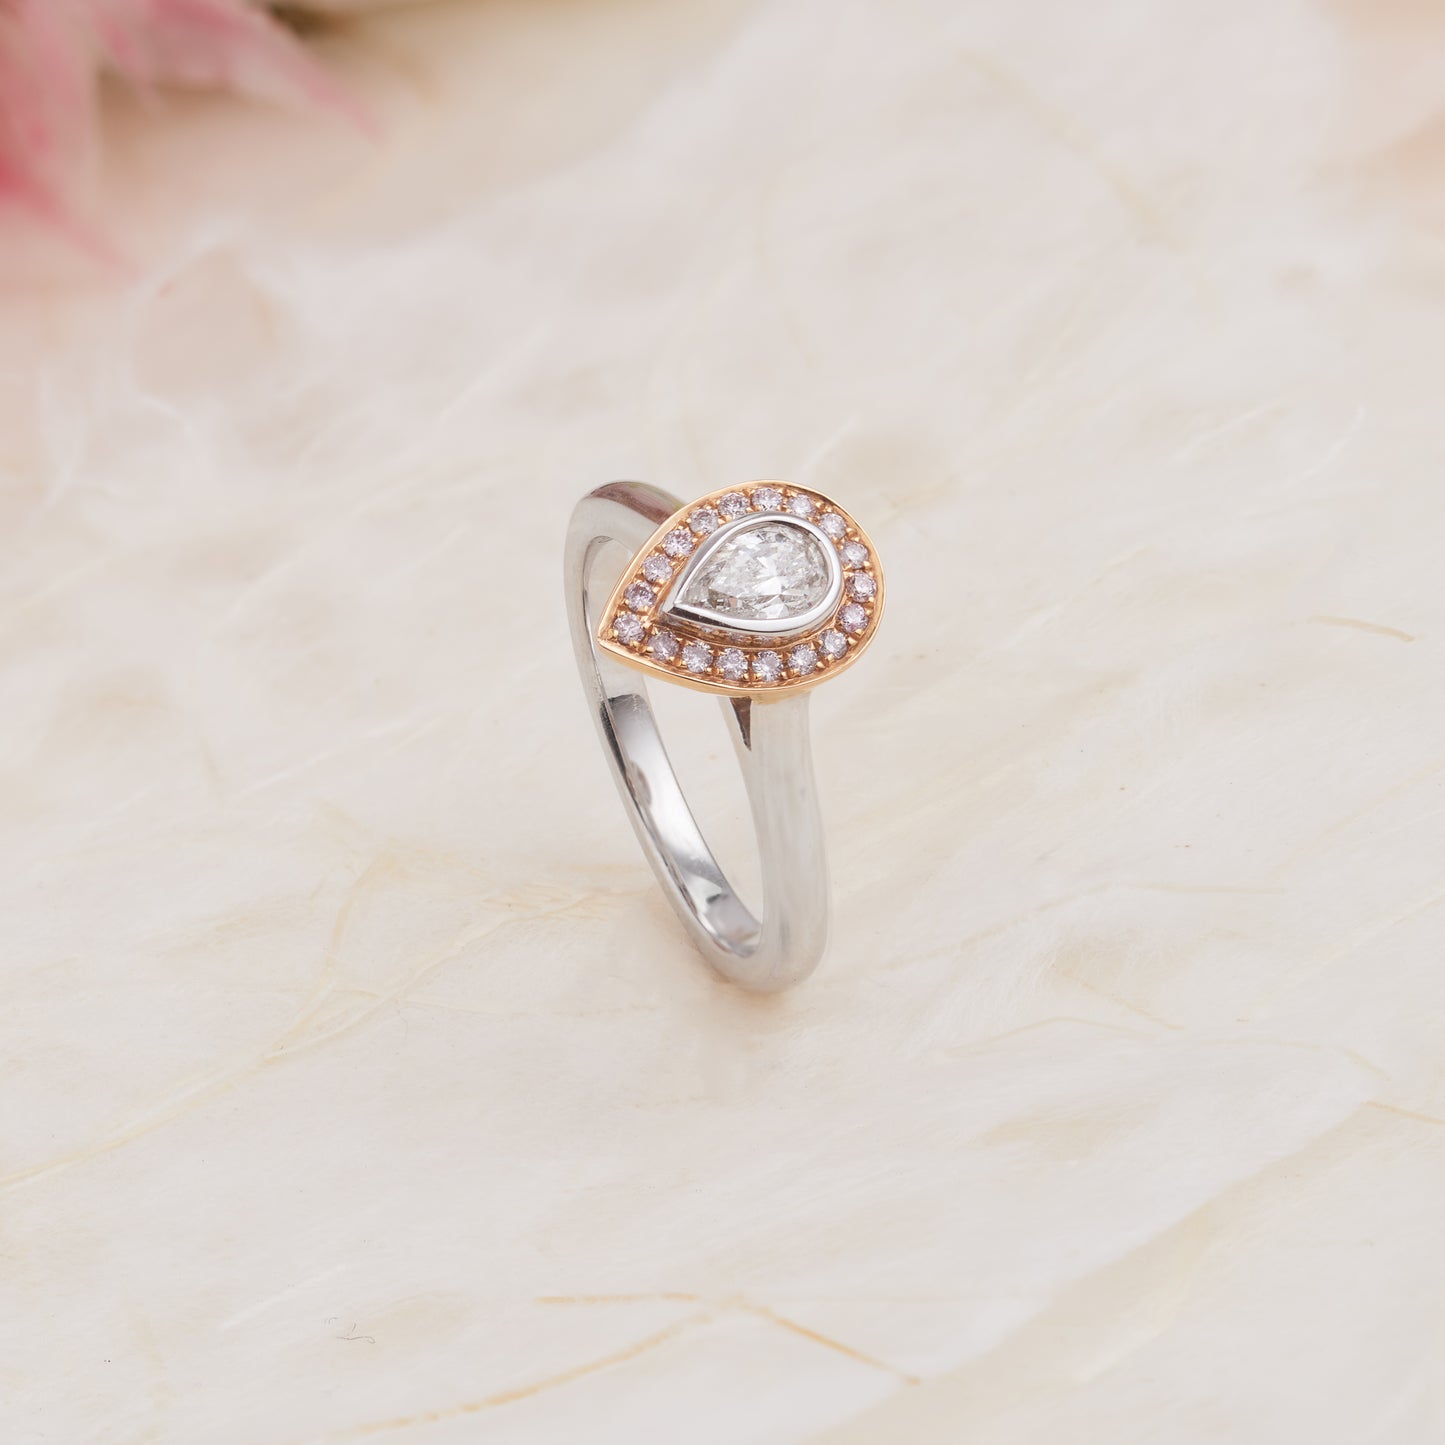 18K White and Rose Gold Pear Diamond with Argyle Pink Diamond Halo Engagement Ring 0.41tdw